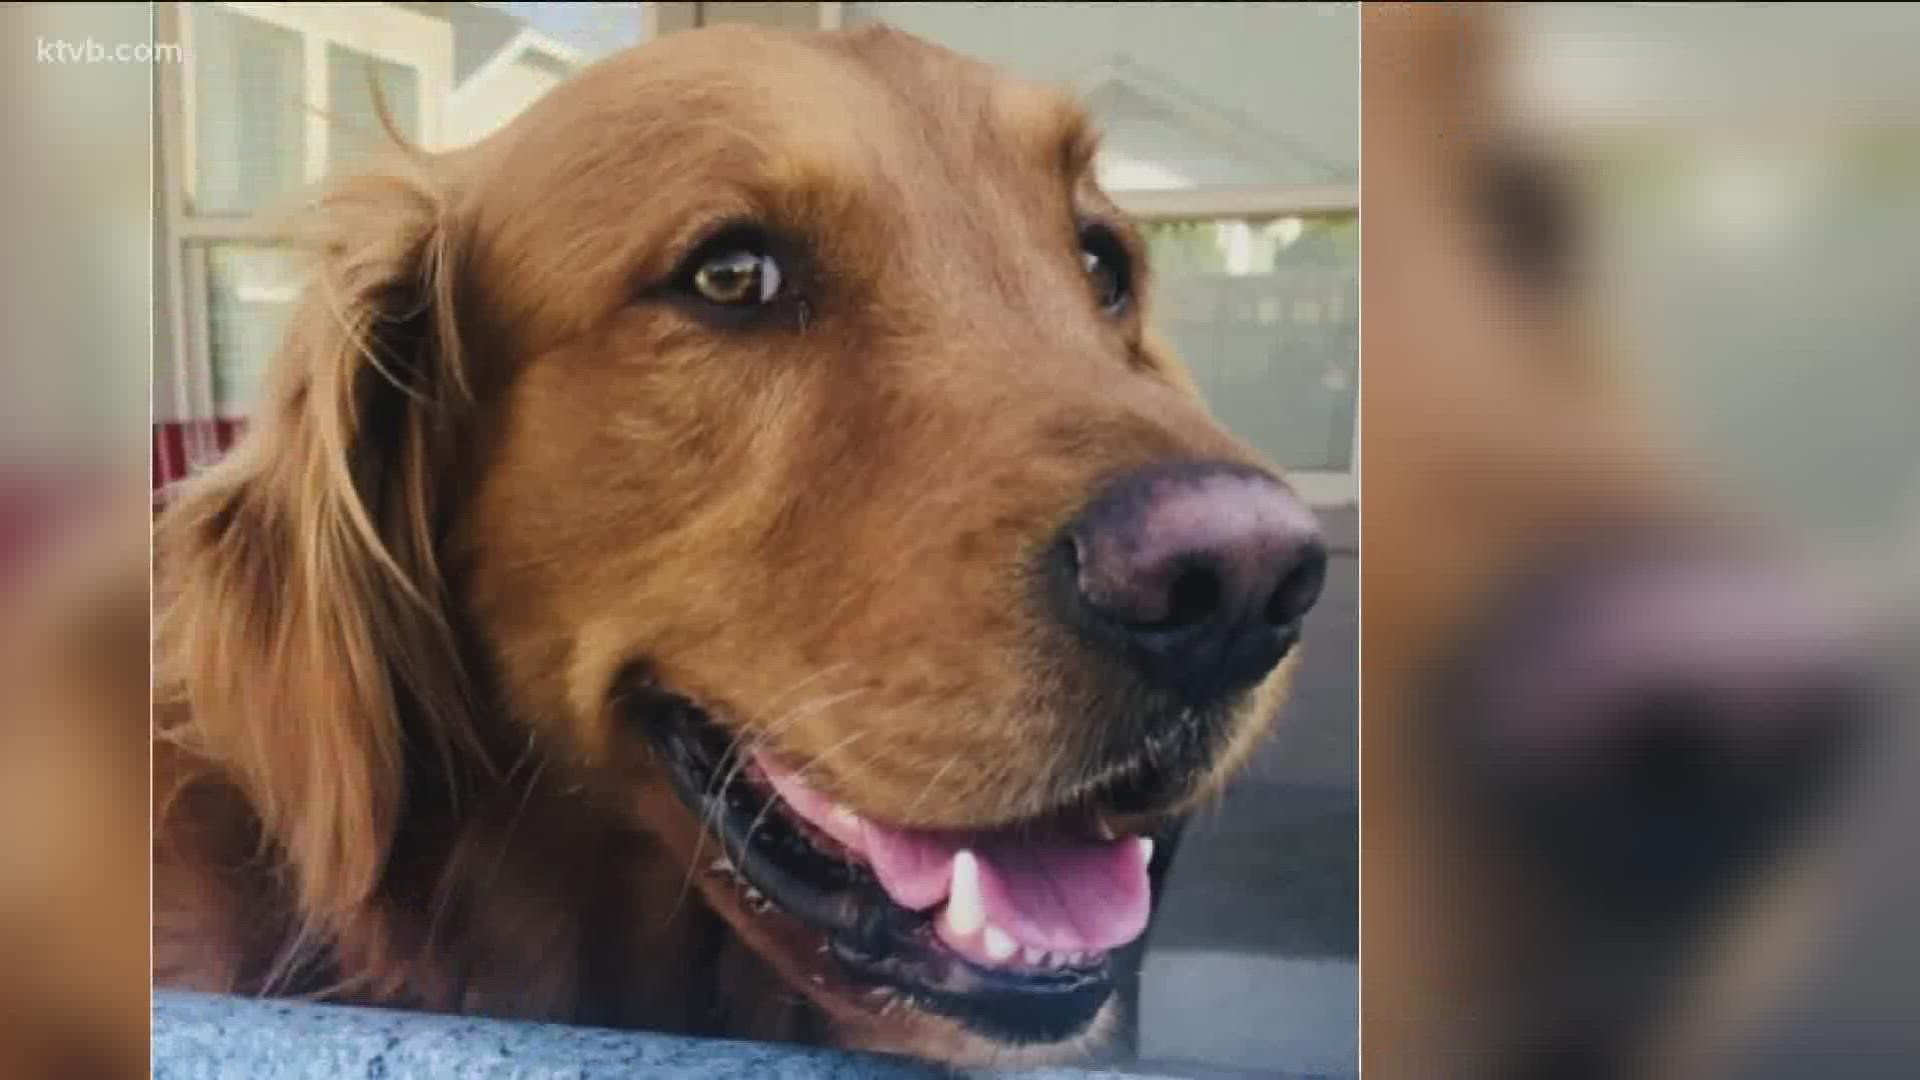 Carmen Garshelis is taking action in civil court after the death of Stanley, her four-year-old golden retriever.